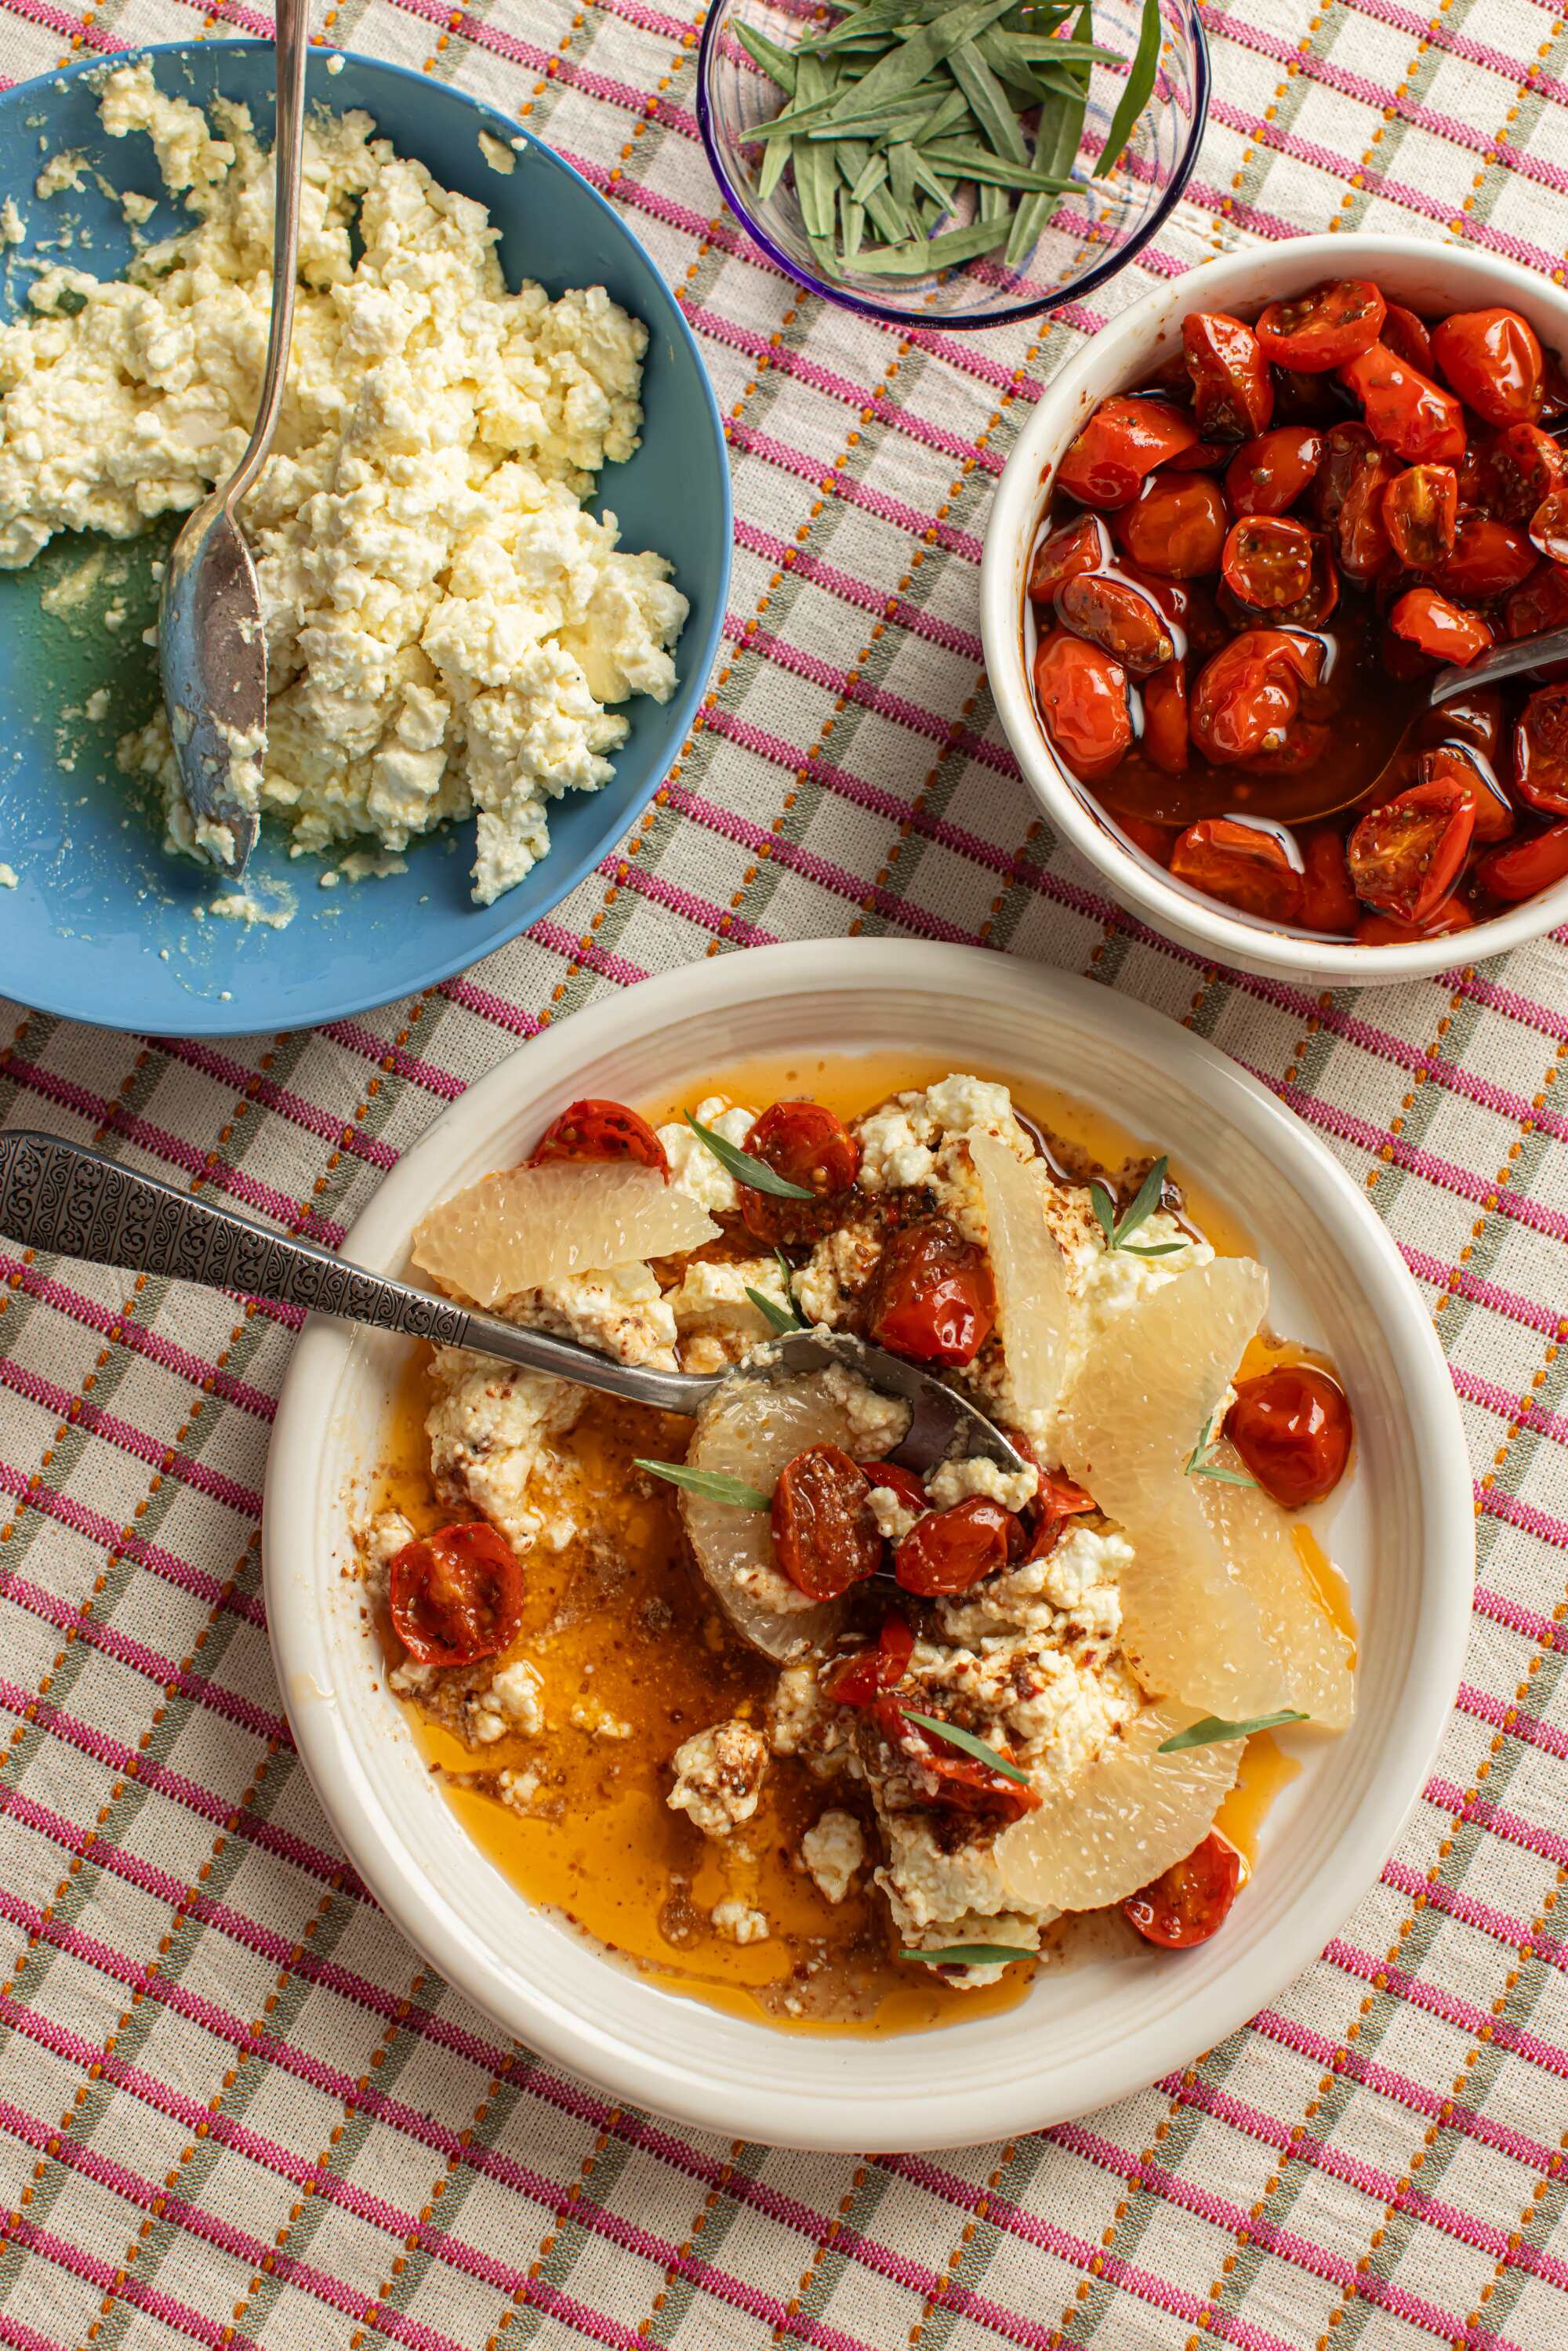  Marinated feta with grapefruit and roasted tomatoes from the Kismet cookbook.